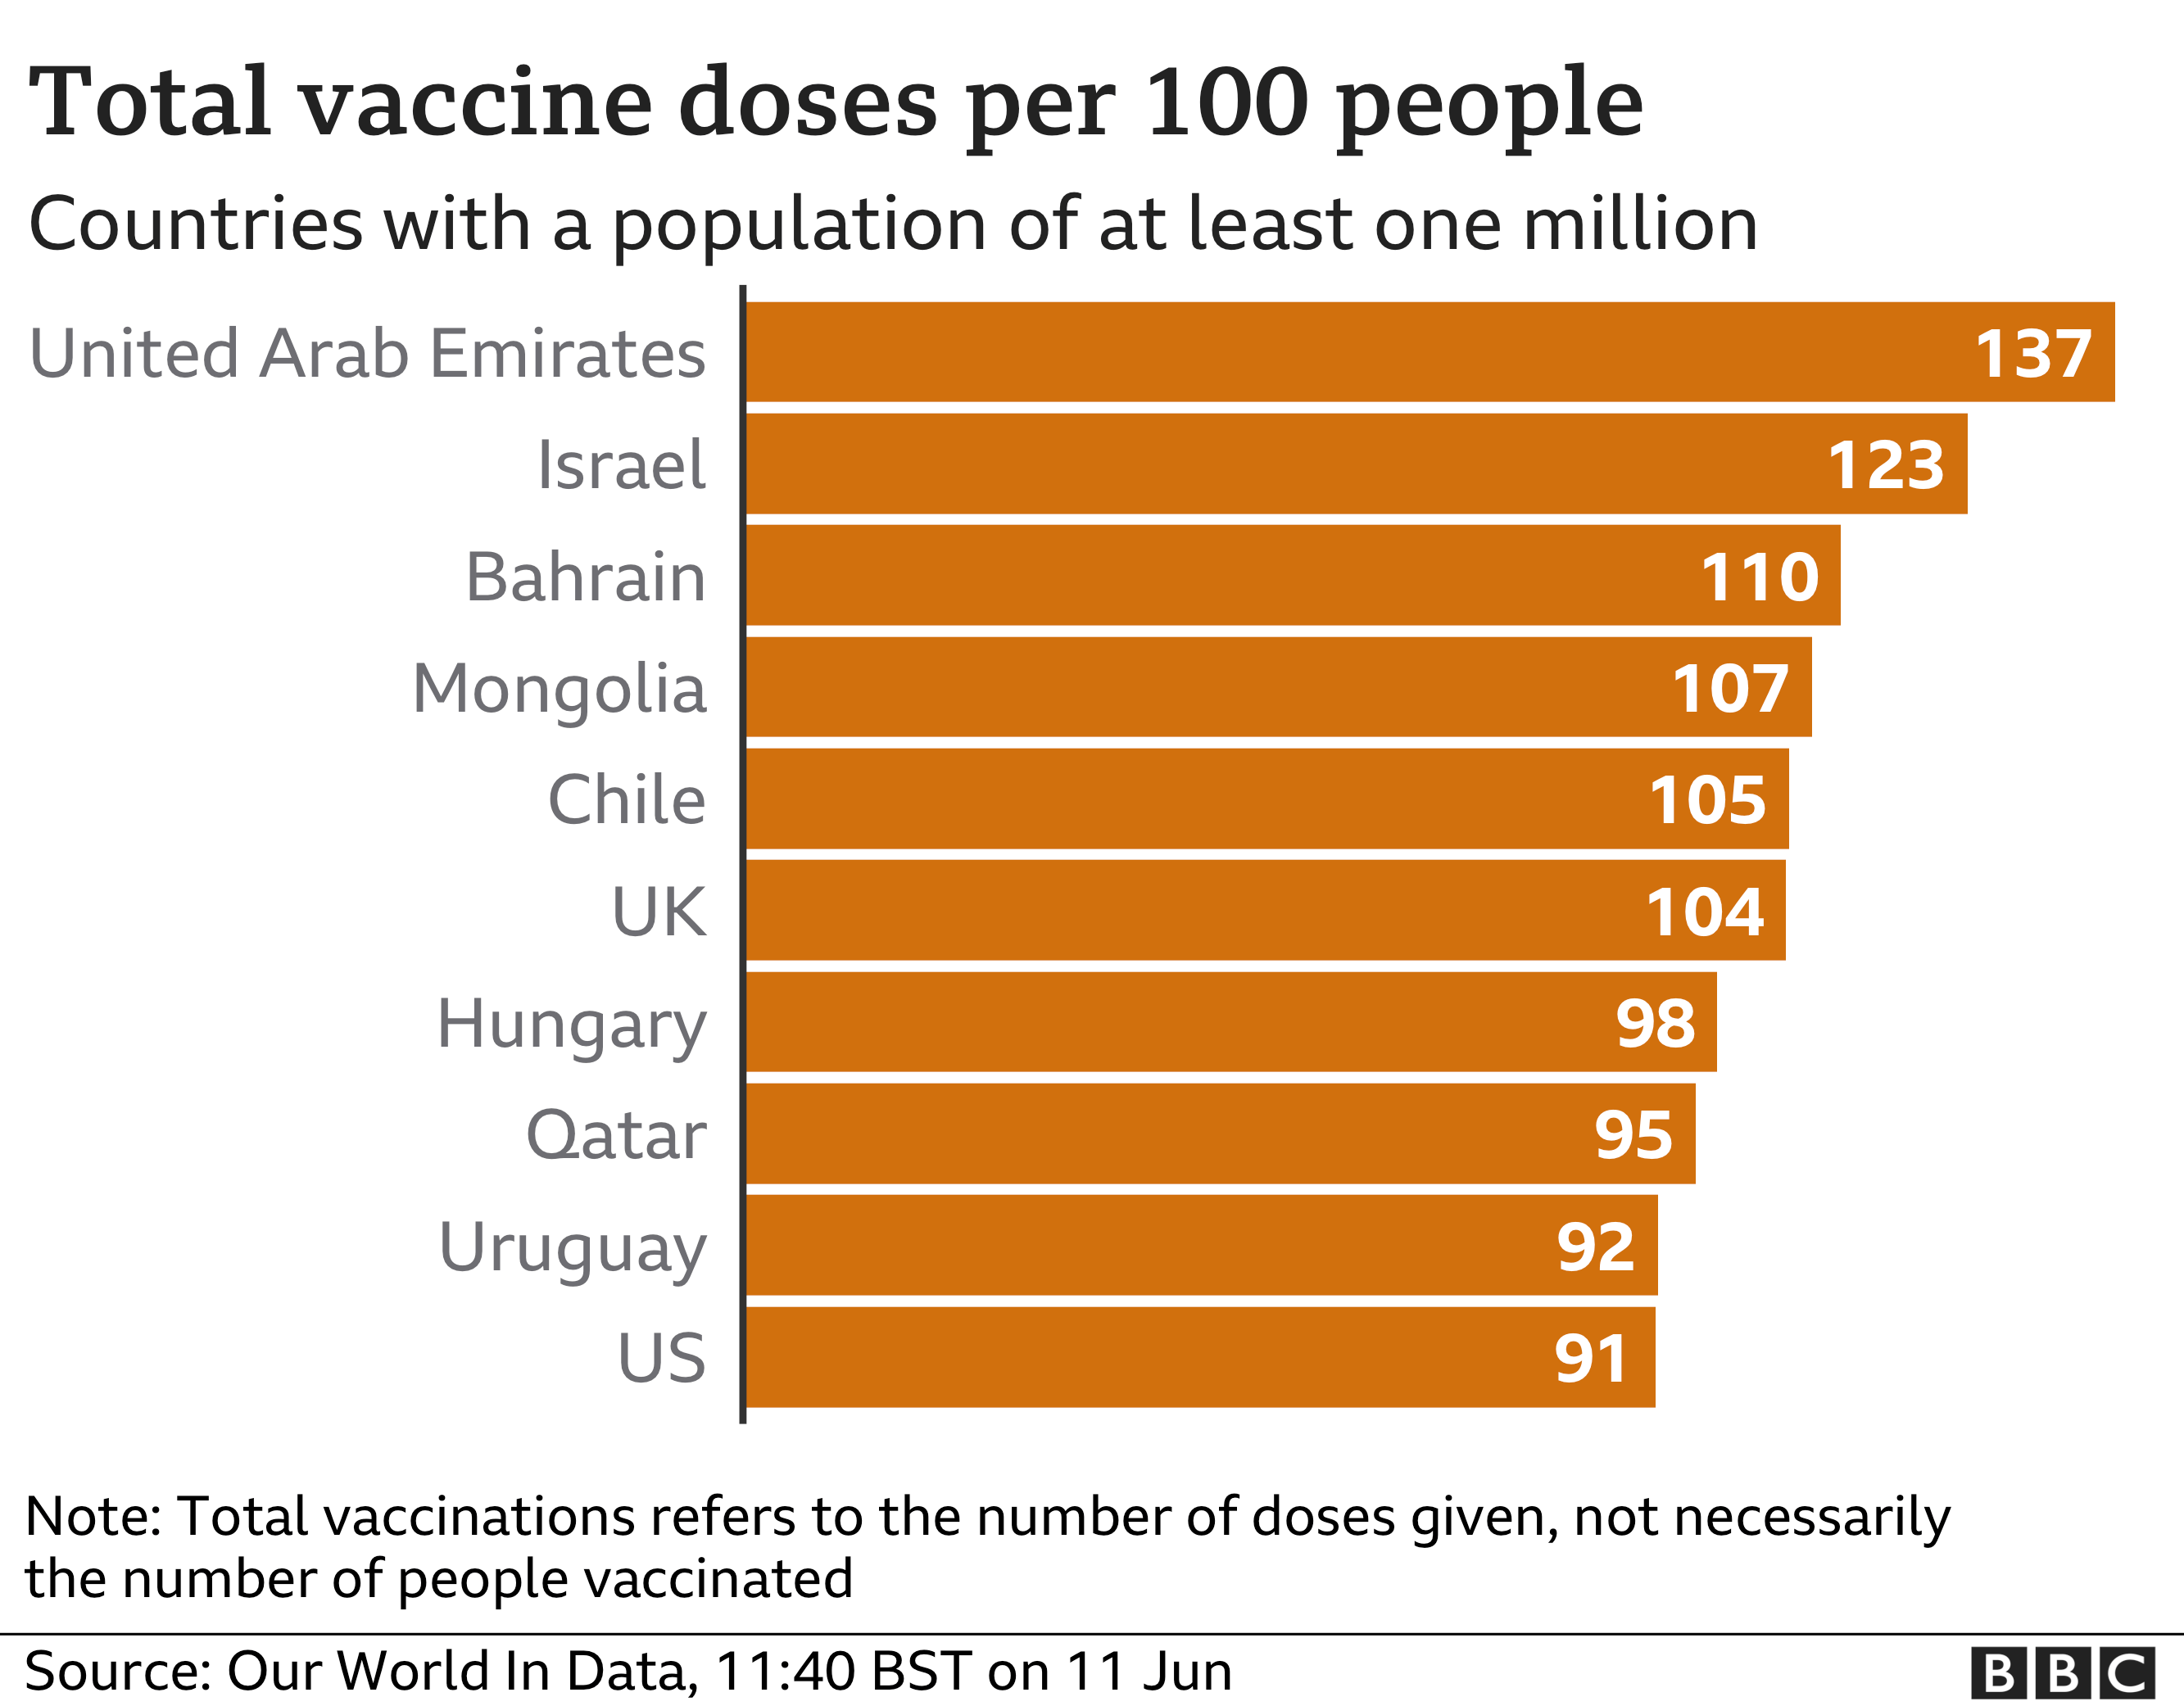 Chart showing the total number of vaccine doses per 100 people by country